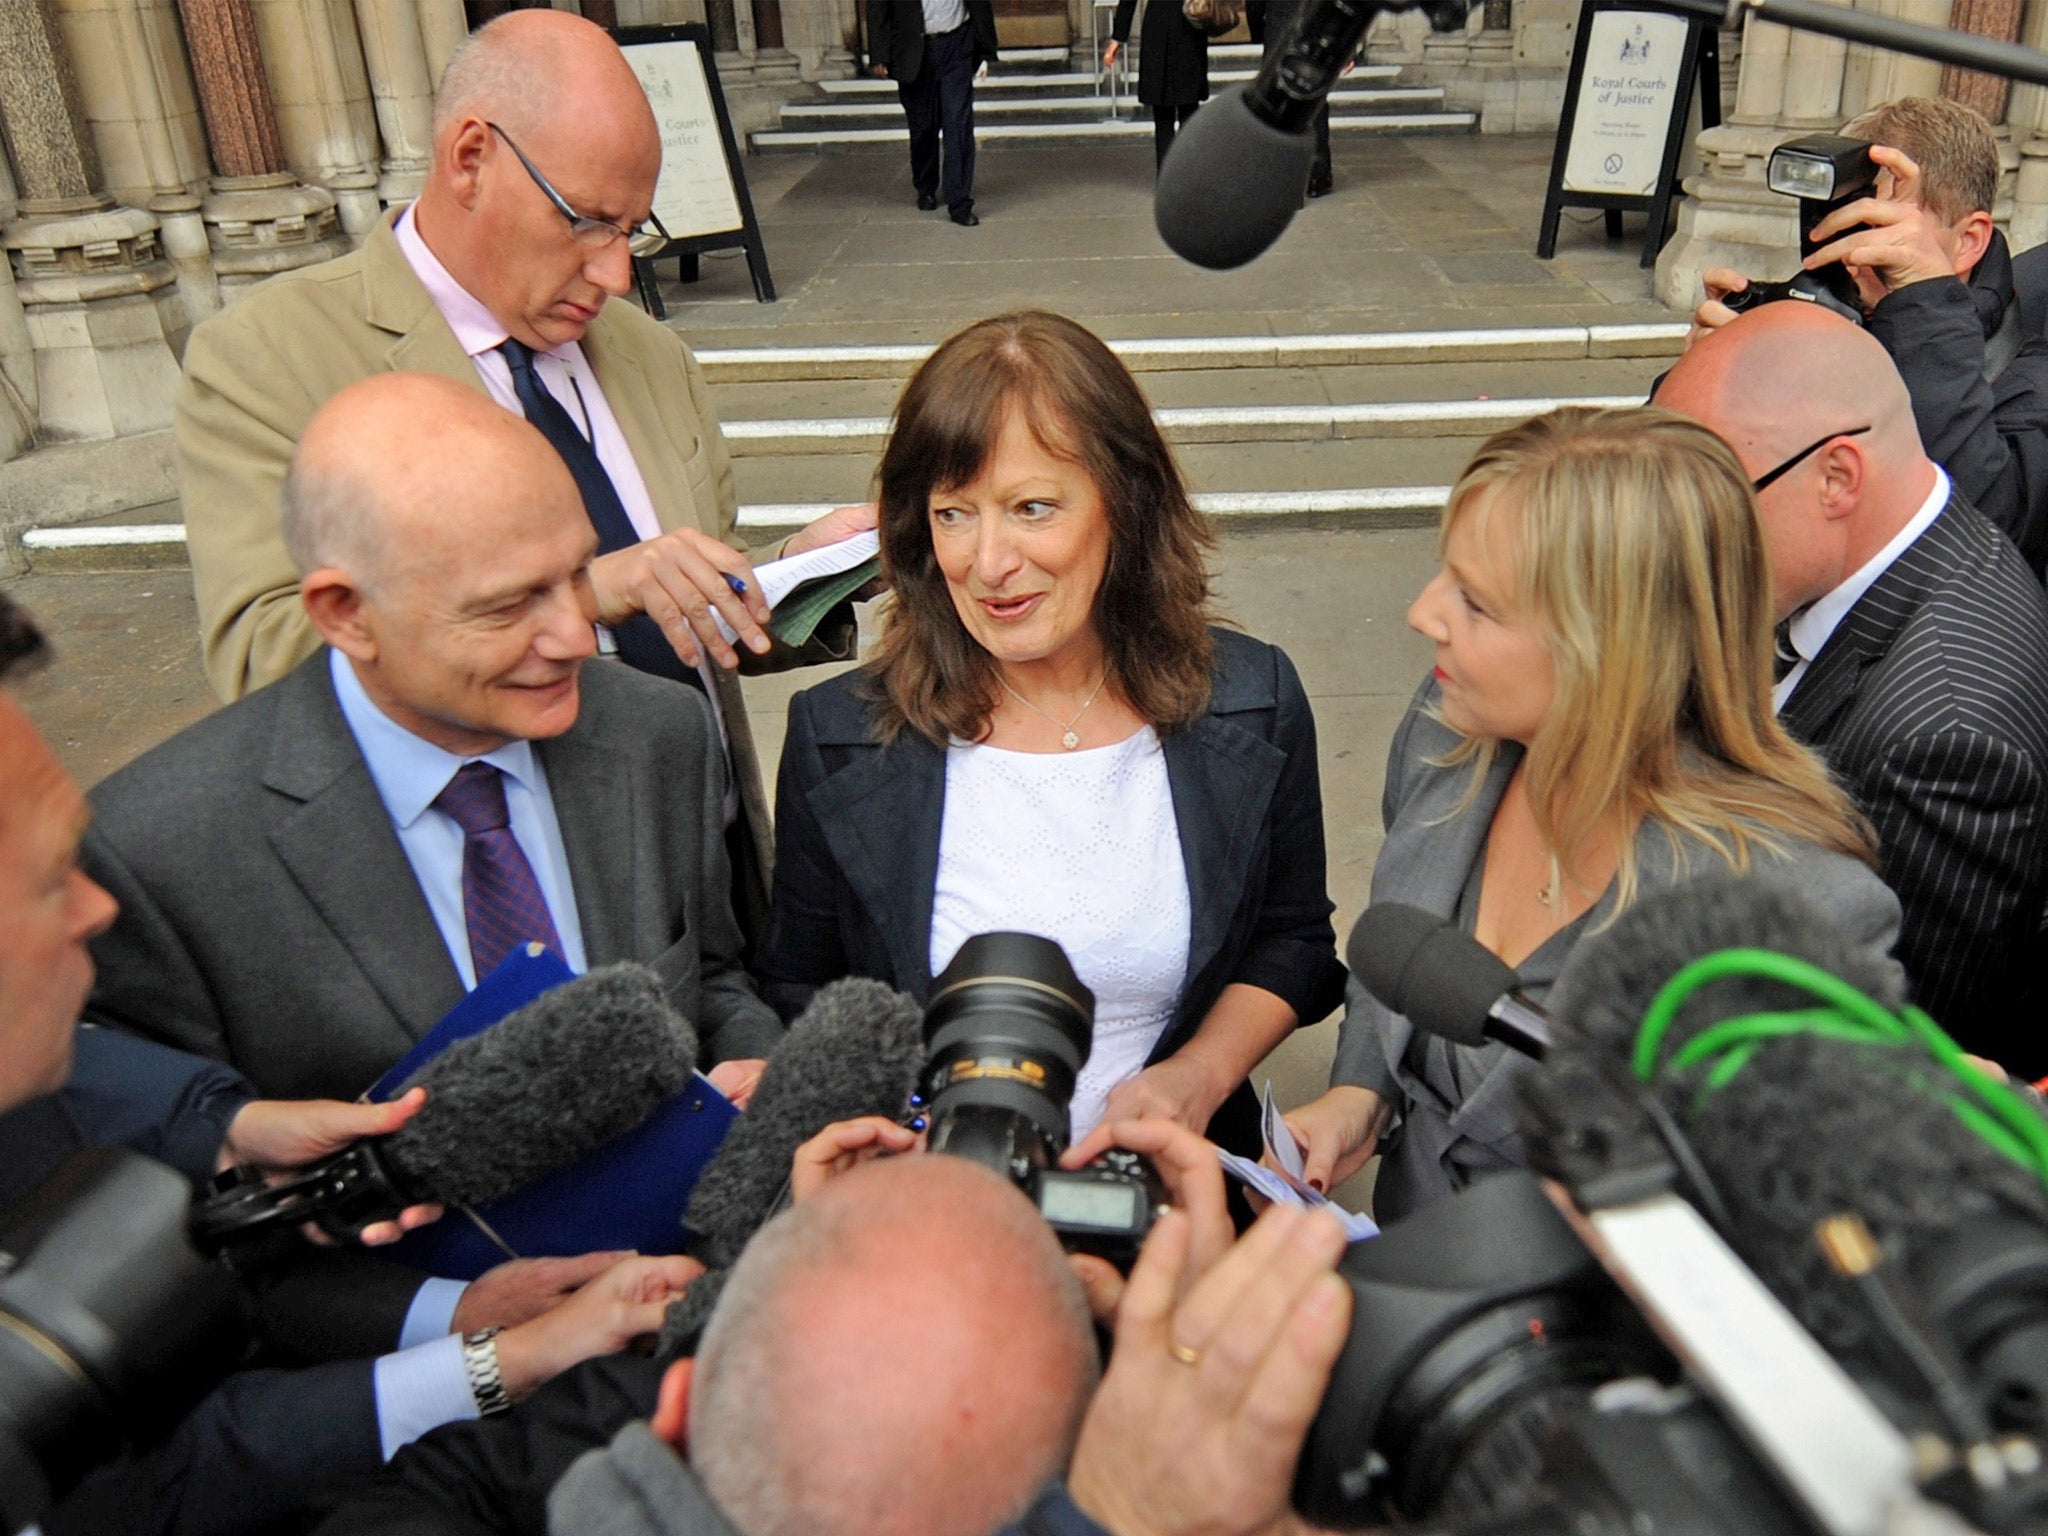 Ex-children’s services chief Sharon Shoesmith comments on her victory at the Royal Courts of Justice in May 2011